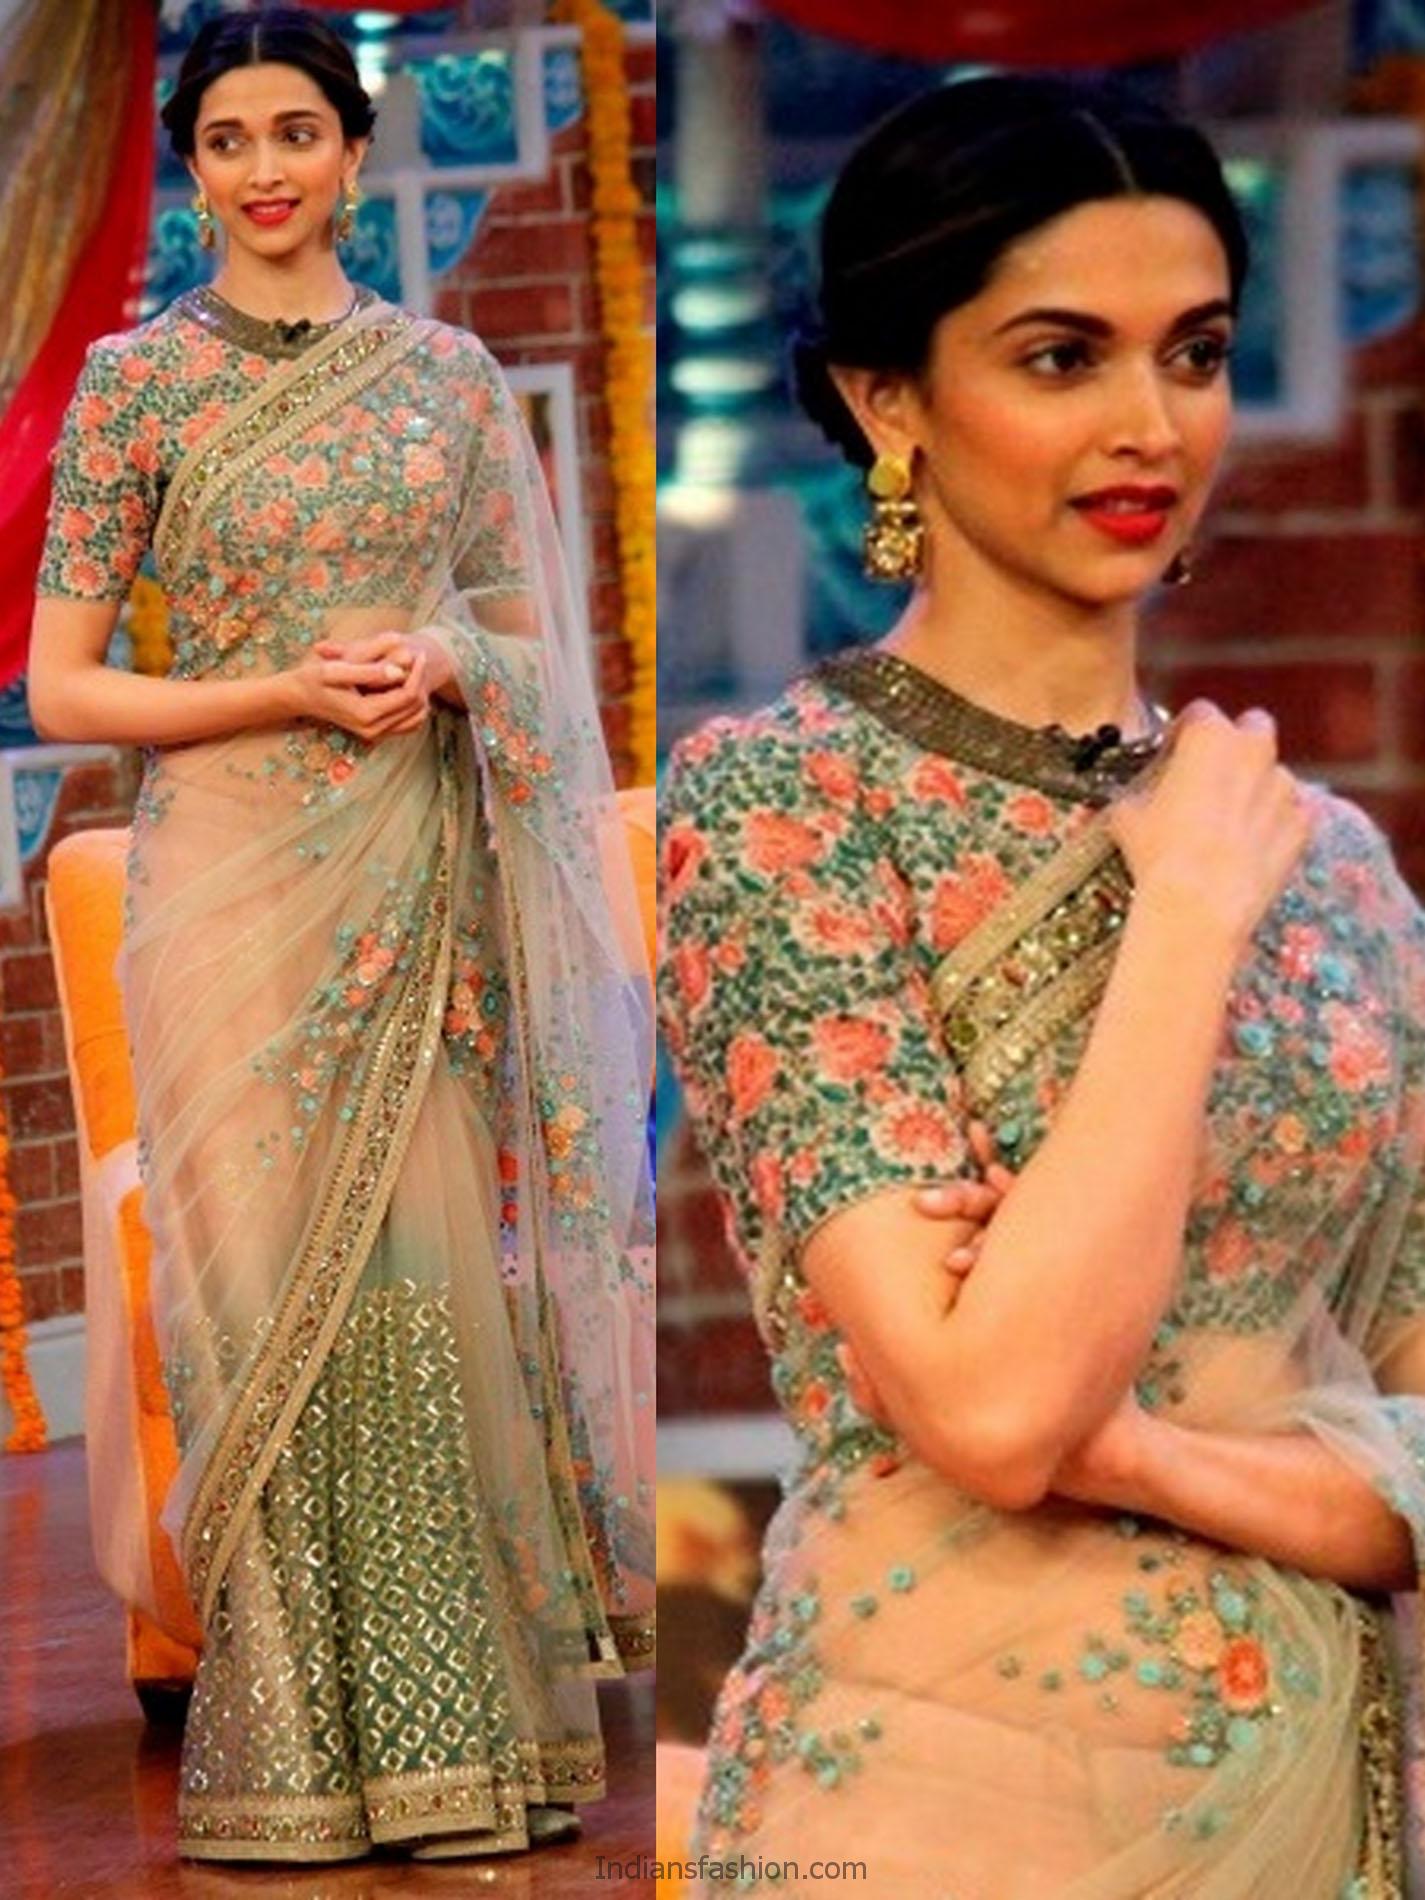  Intricate Floral Embroidered Blouse worn by Deepika